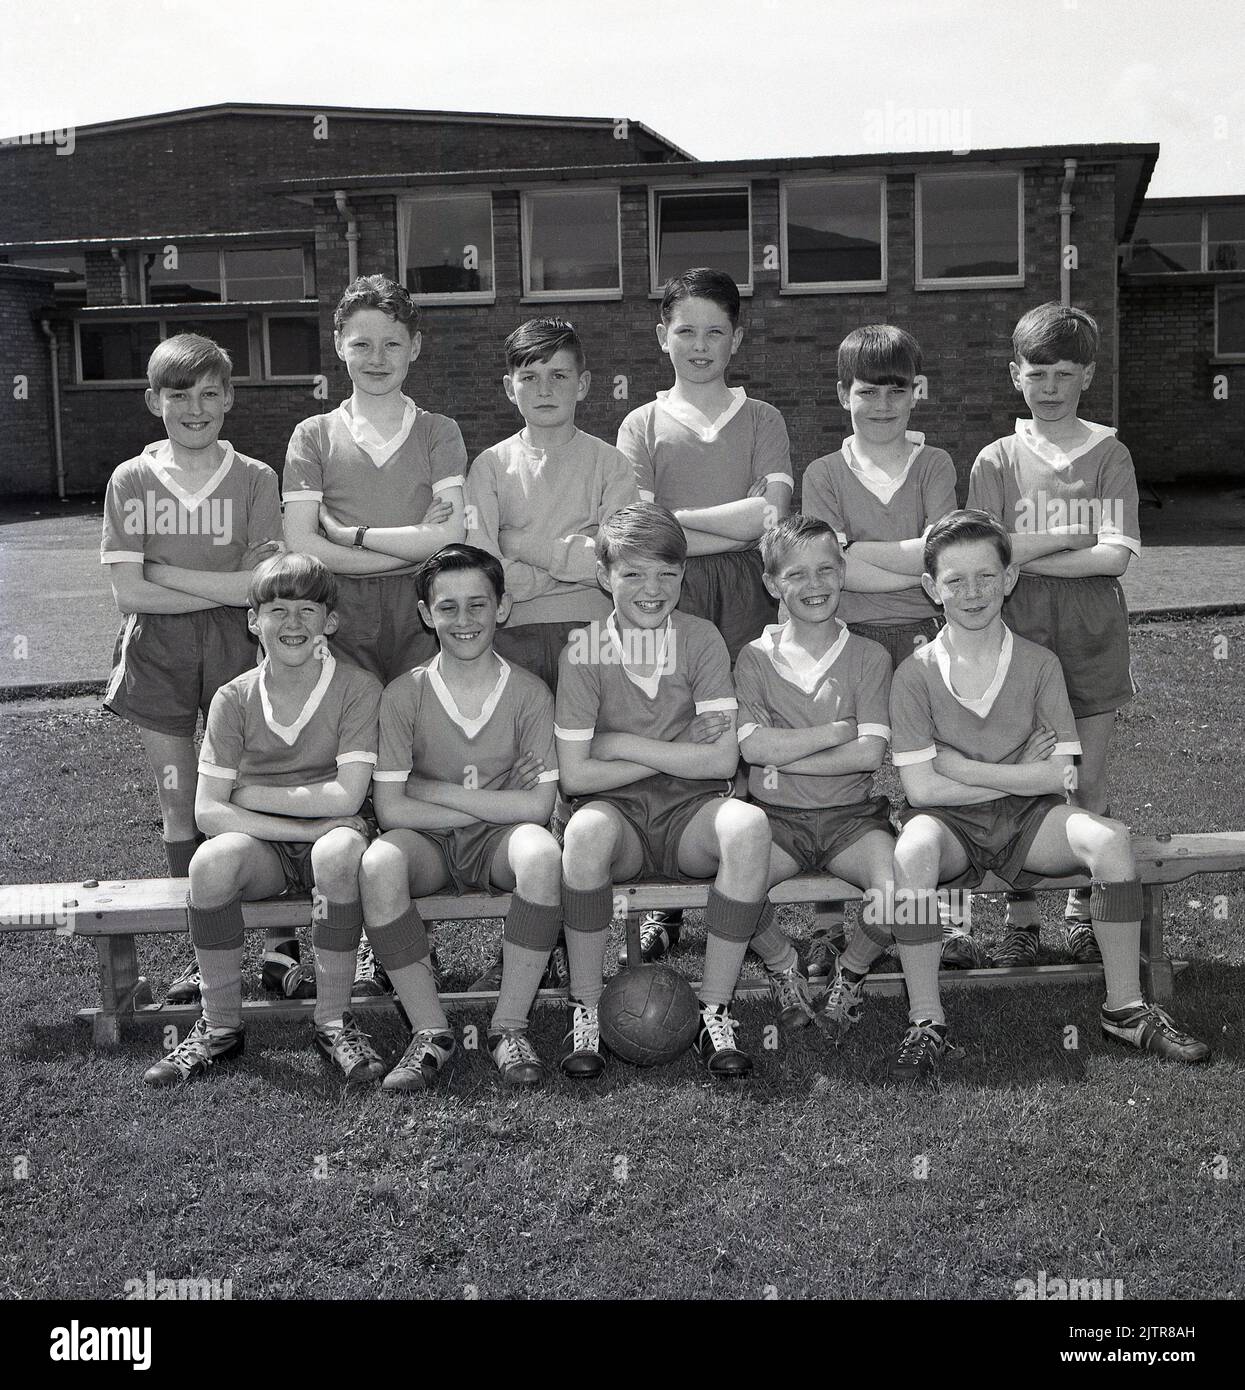 1965, historical, junior school football team group photo. Happy young boys wearing the kit and boots of the era; v- neck shirts, pull-string shorts and football boots, many with leather covered steel toepads including some with a high ankle. Seveal of the boys are wearing the popular 'Gola' boot of the day, a leather football boot, with a lower cut below the ankle, made by Botterill's of Bozeat of Northamptonshire, England, a boot company founded in 1895. In the 1960s, players of the famous Liverpool FC wore Gola football boots. Stock Photo